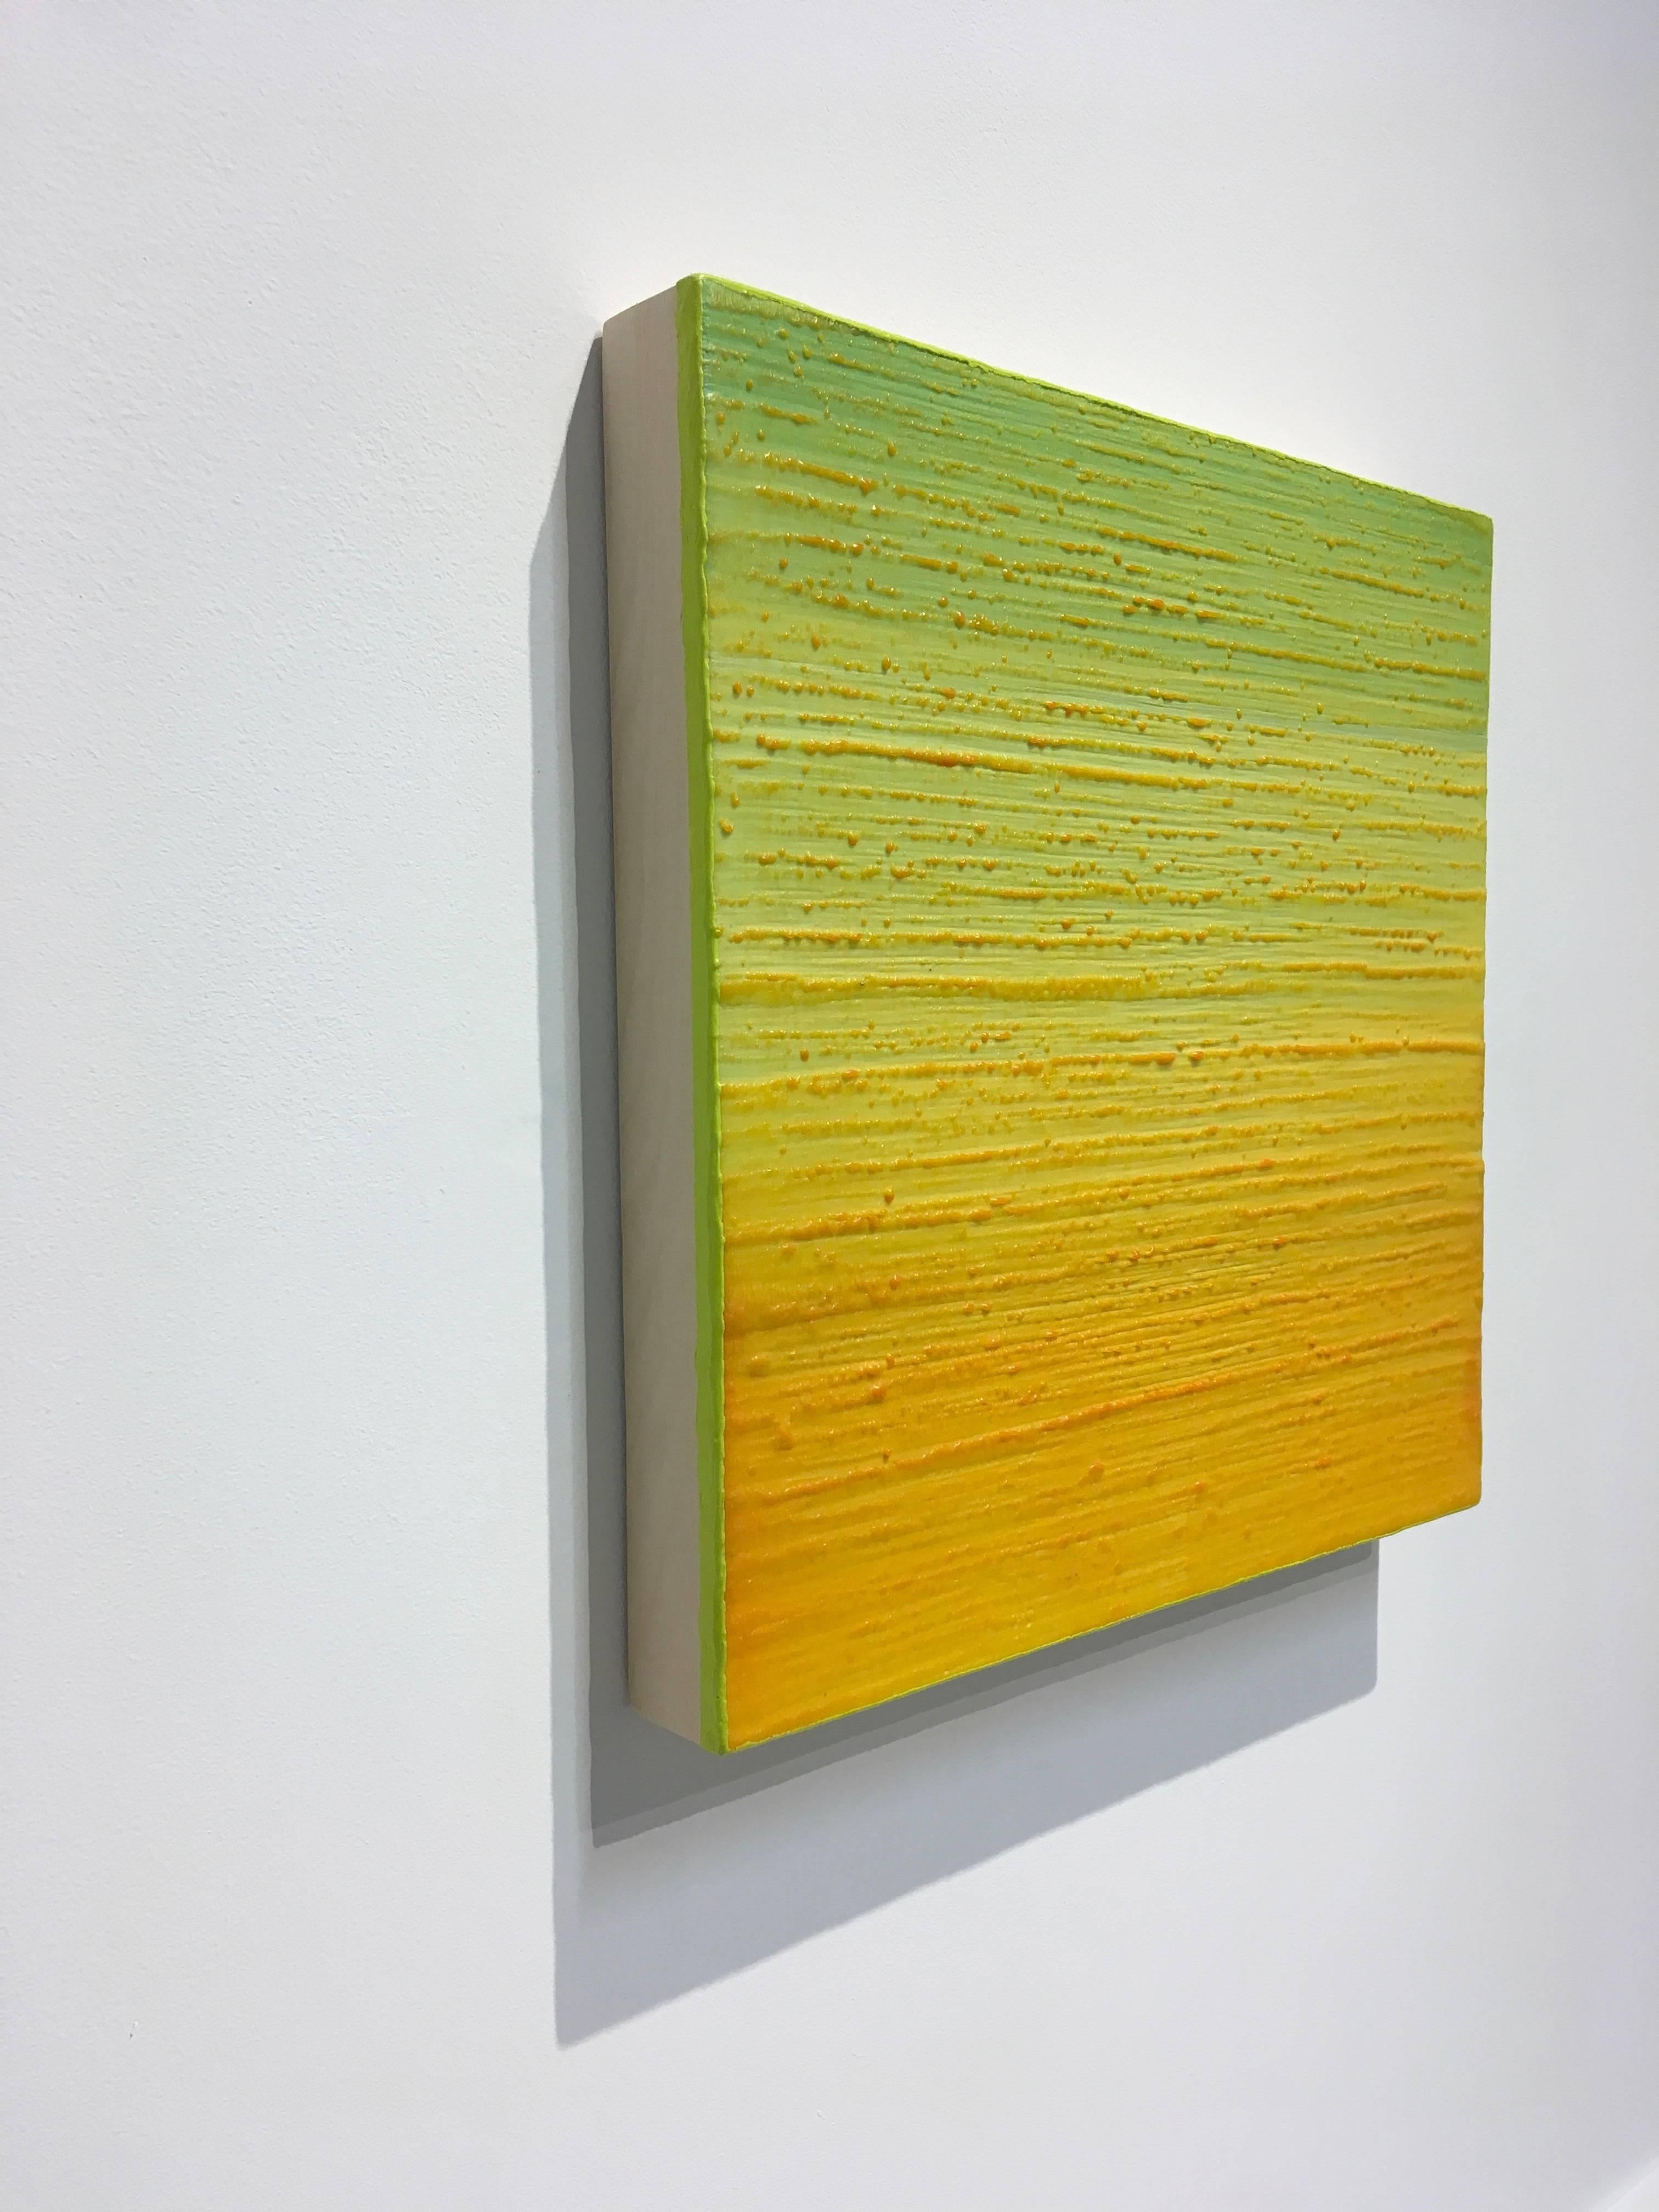 A vibrant orange, yellow and light green encaustic (pigmented beeswax) painting on birch panel accented with lime green edges. Signed, dated and titled on verso.

Joanne Mattera’s paintings can be described as lush minimalism, the work is